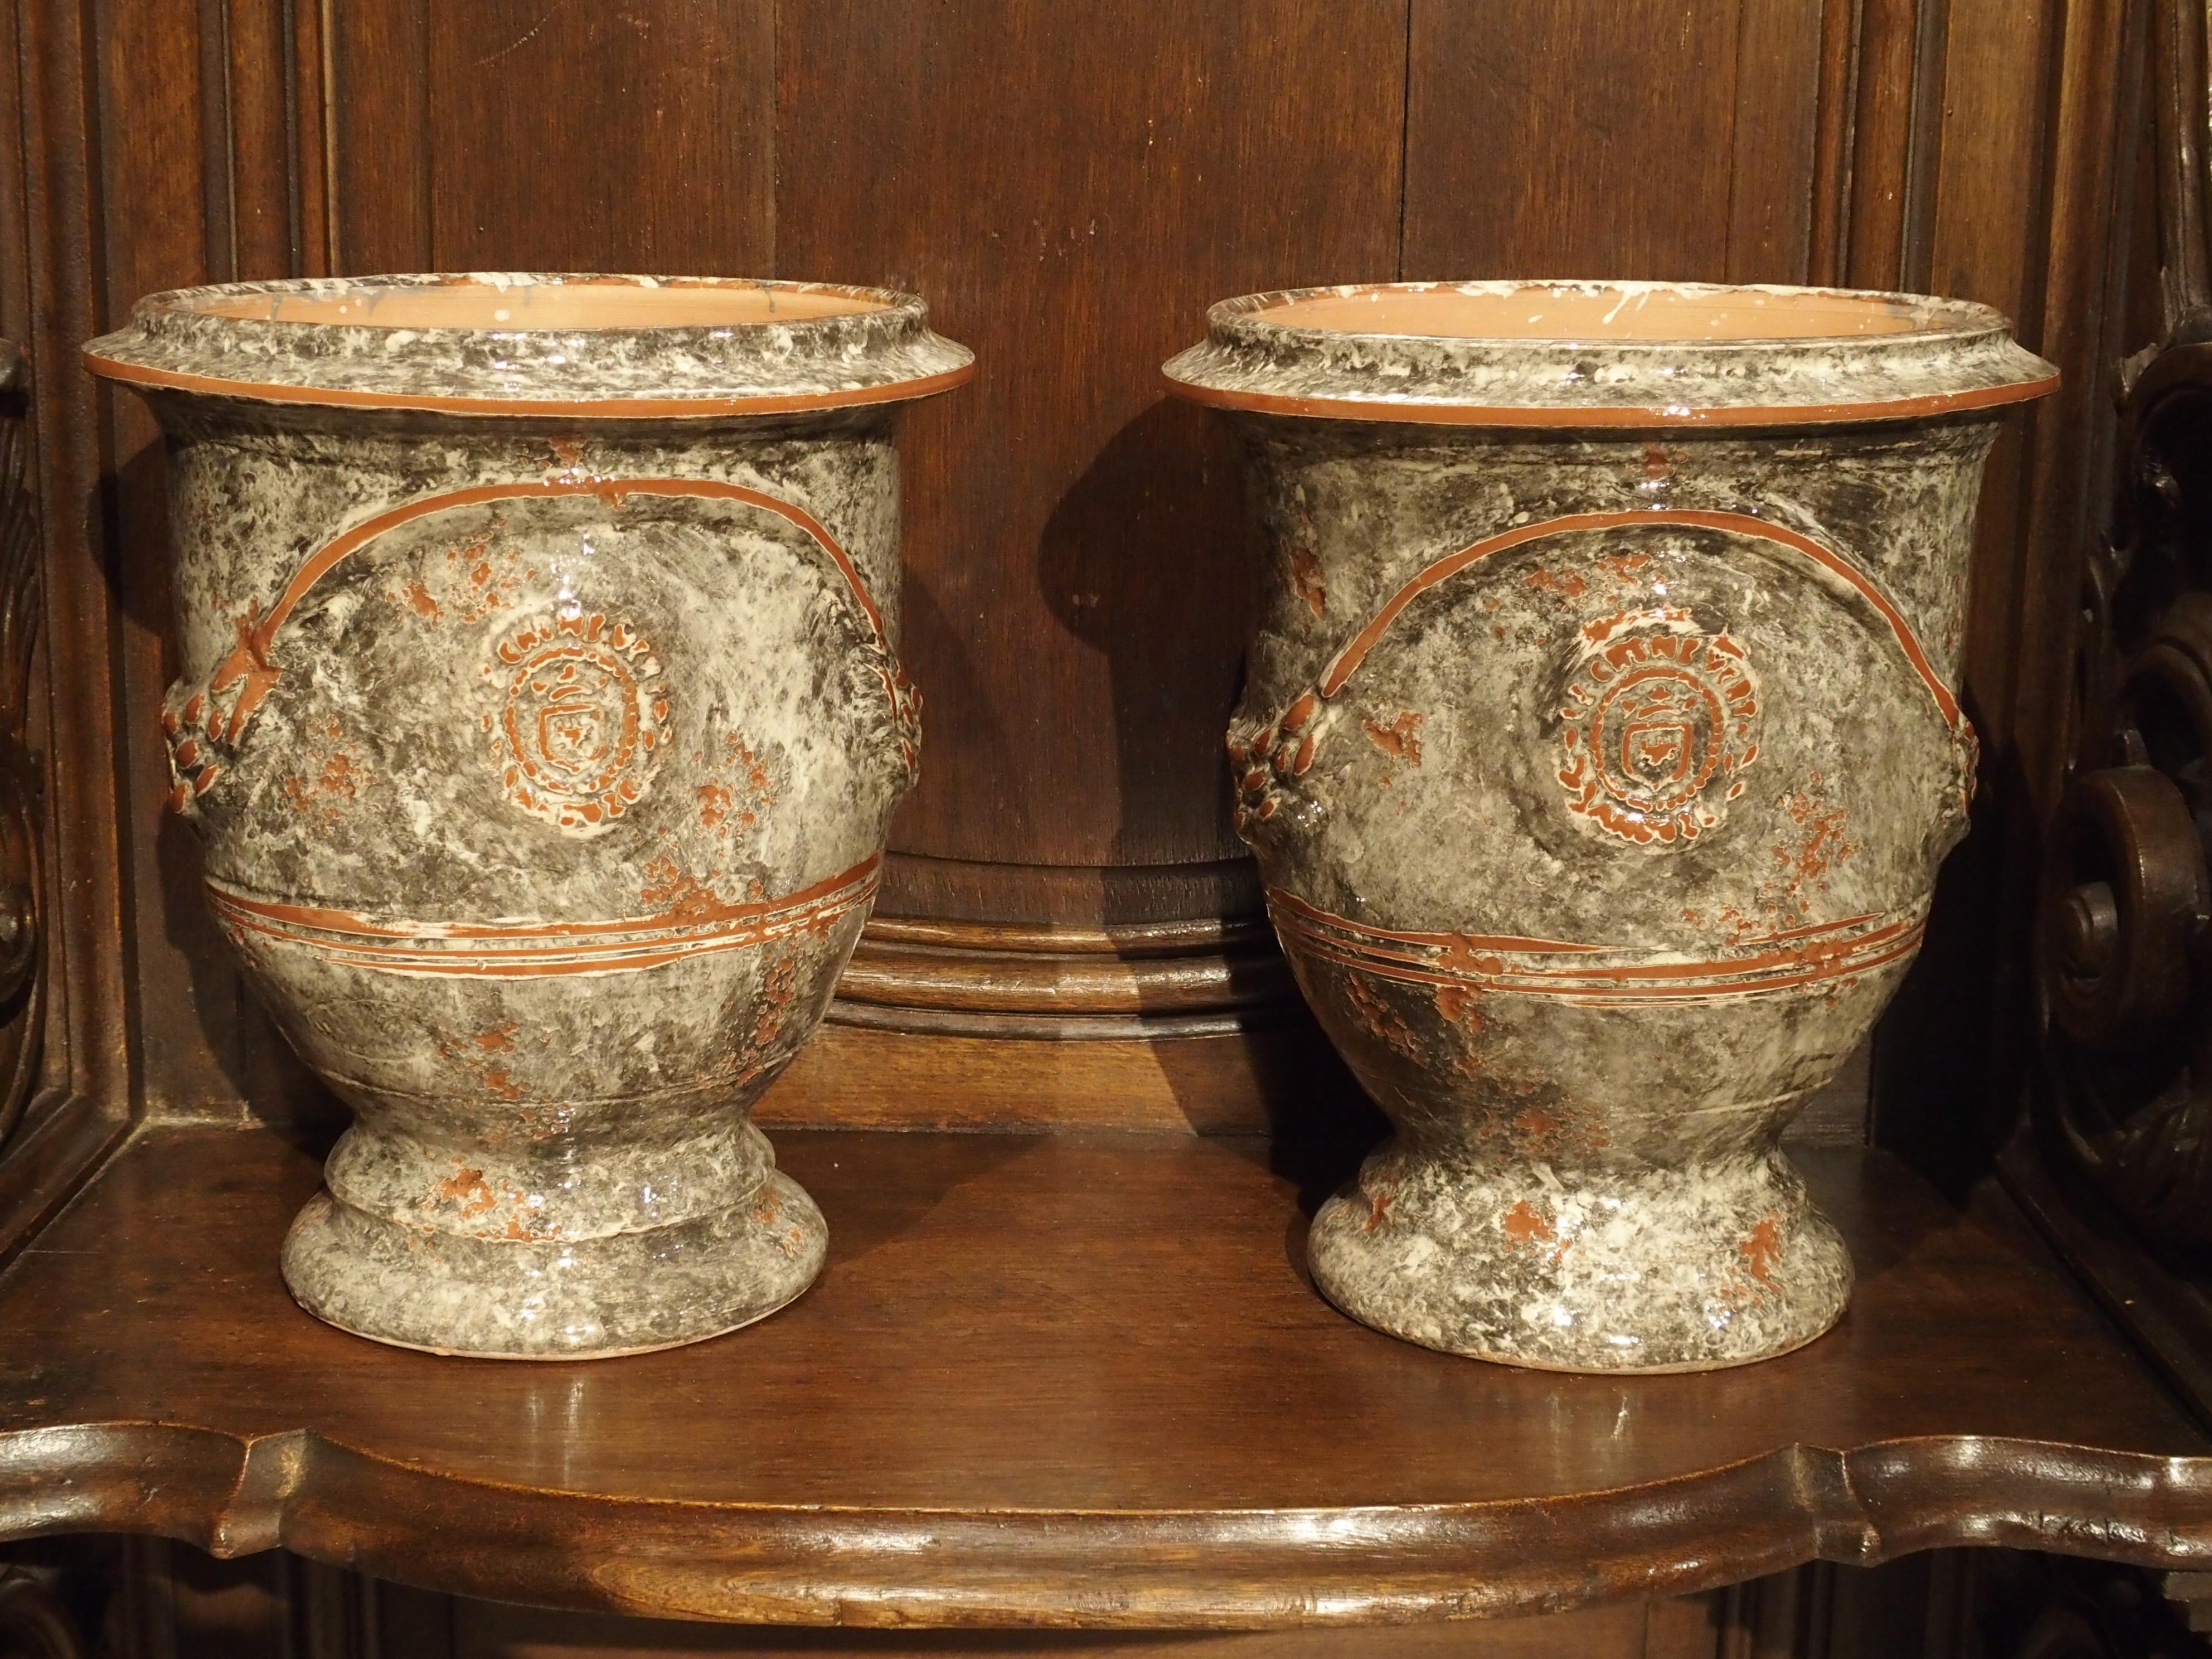 Pair of Small Glazed Terracotta Anduze Pots from France 1